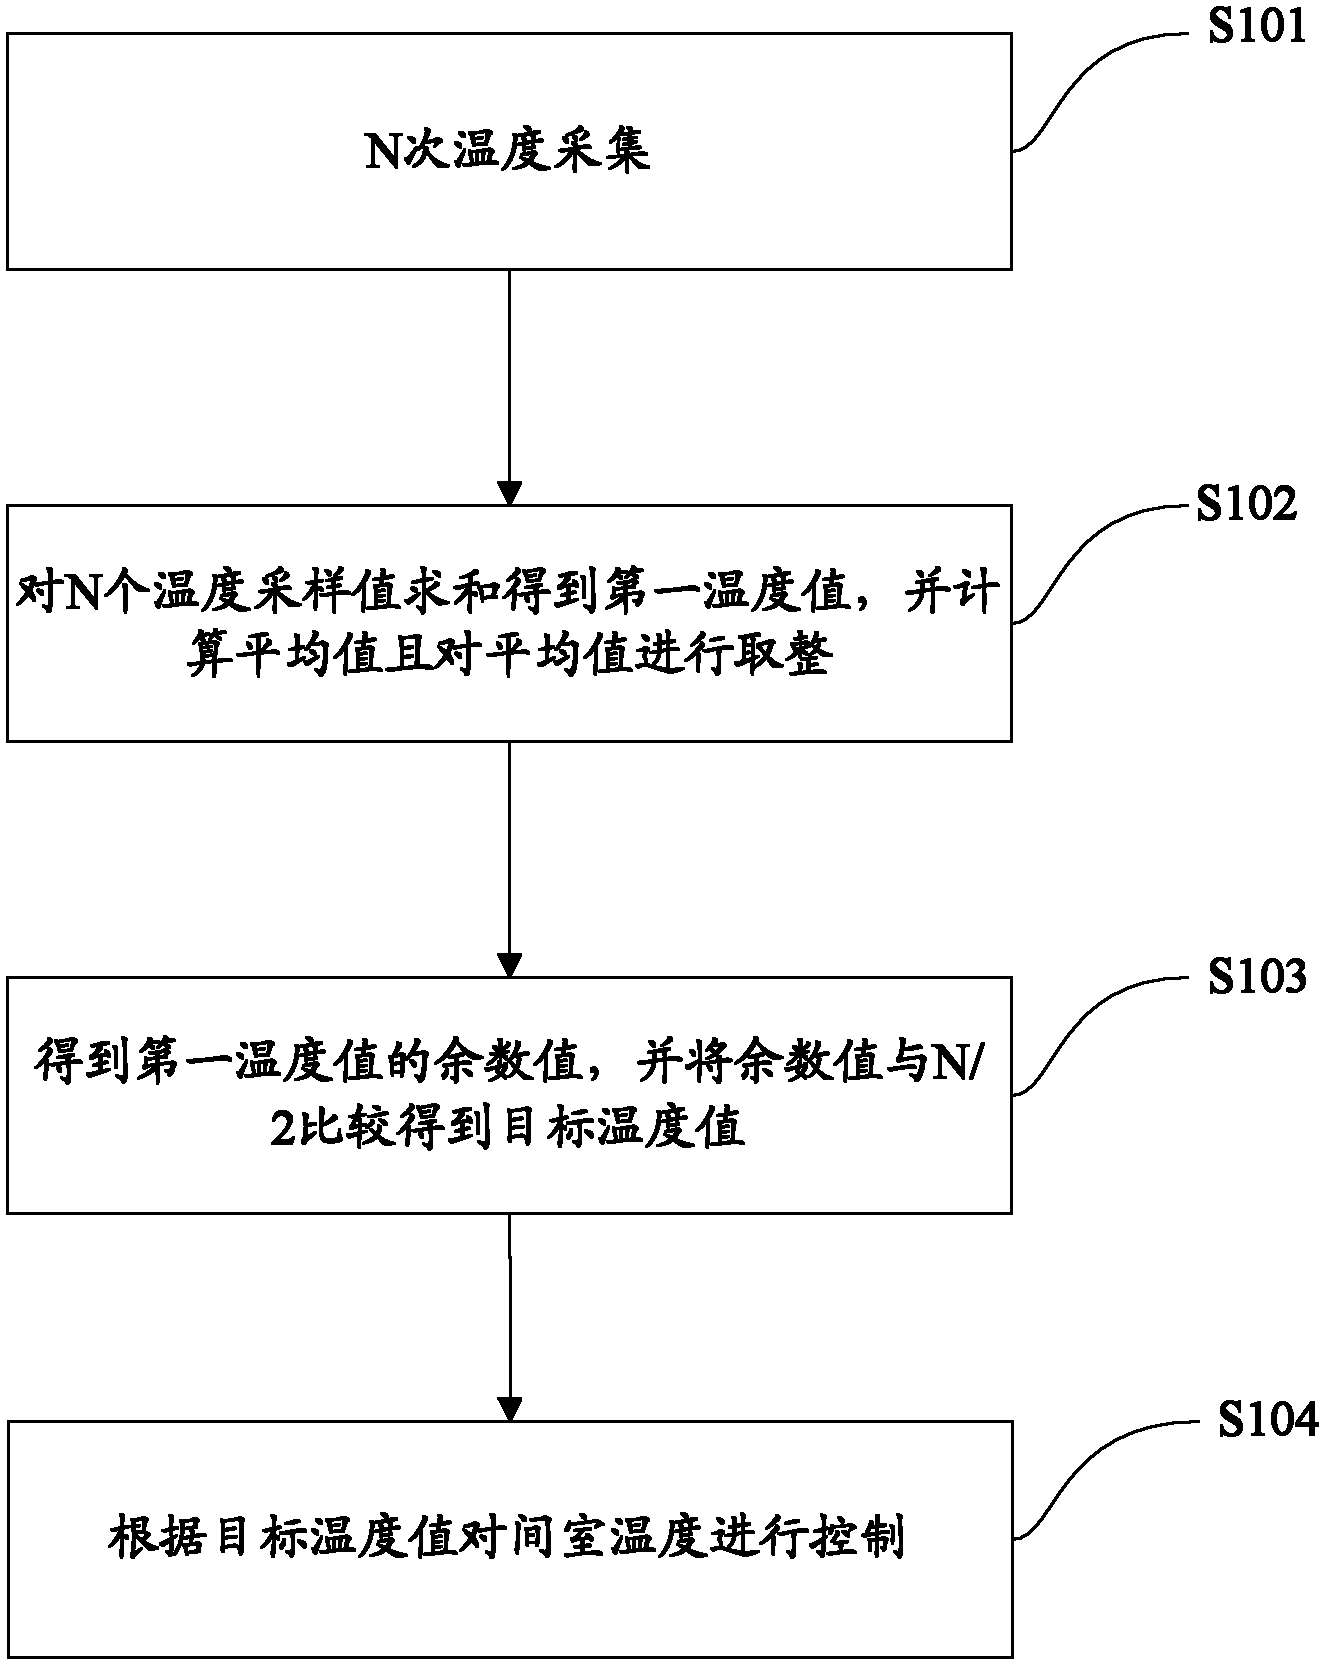 Refrigerator compartment temperature control method, device and refrigerator with same